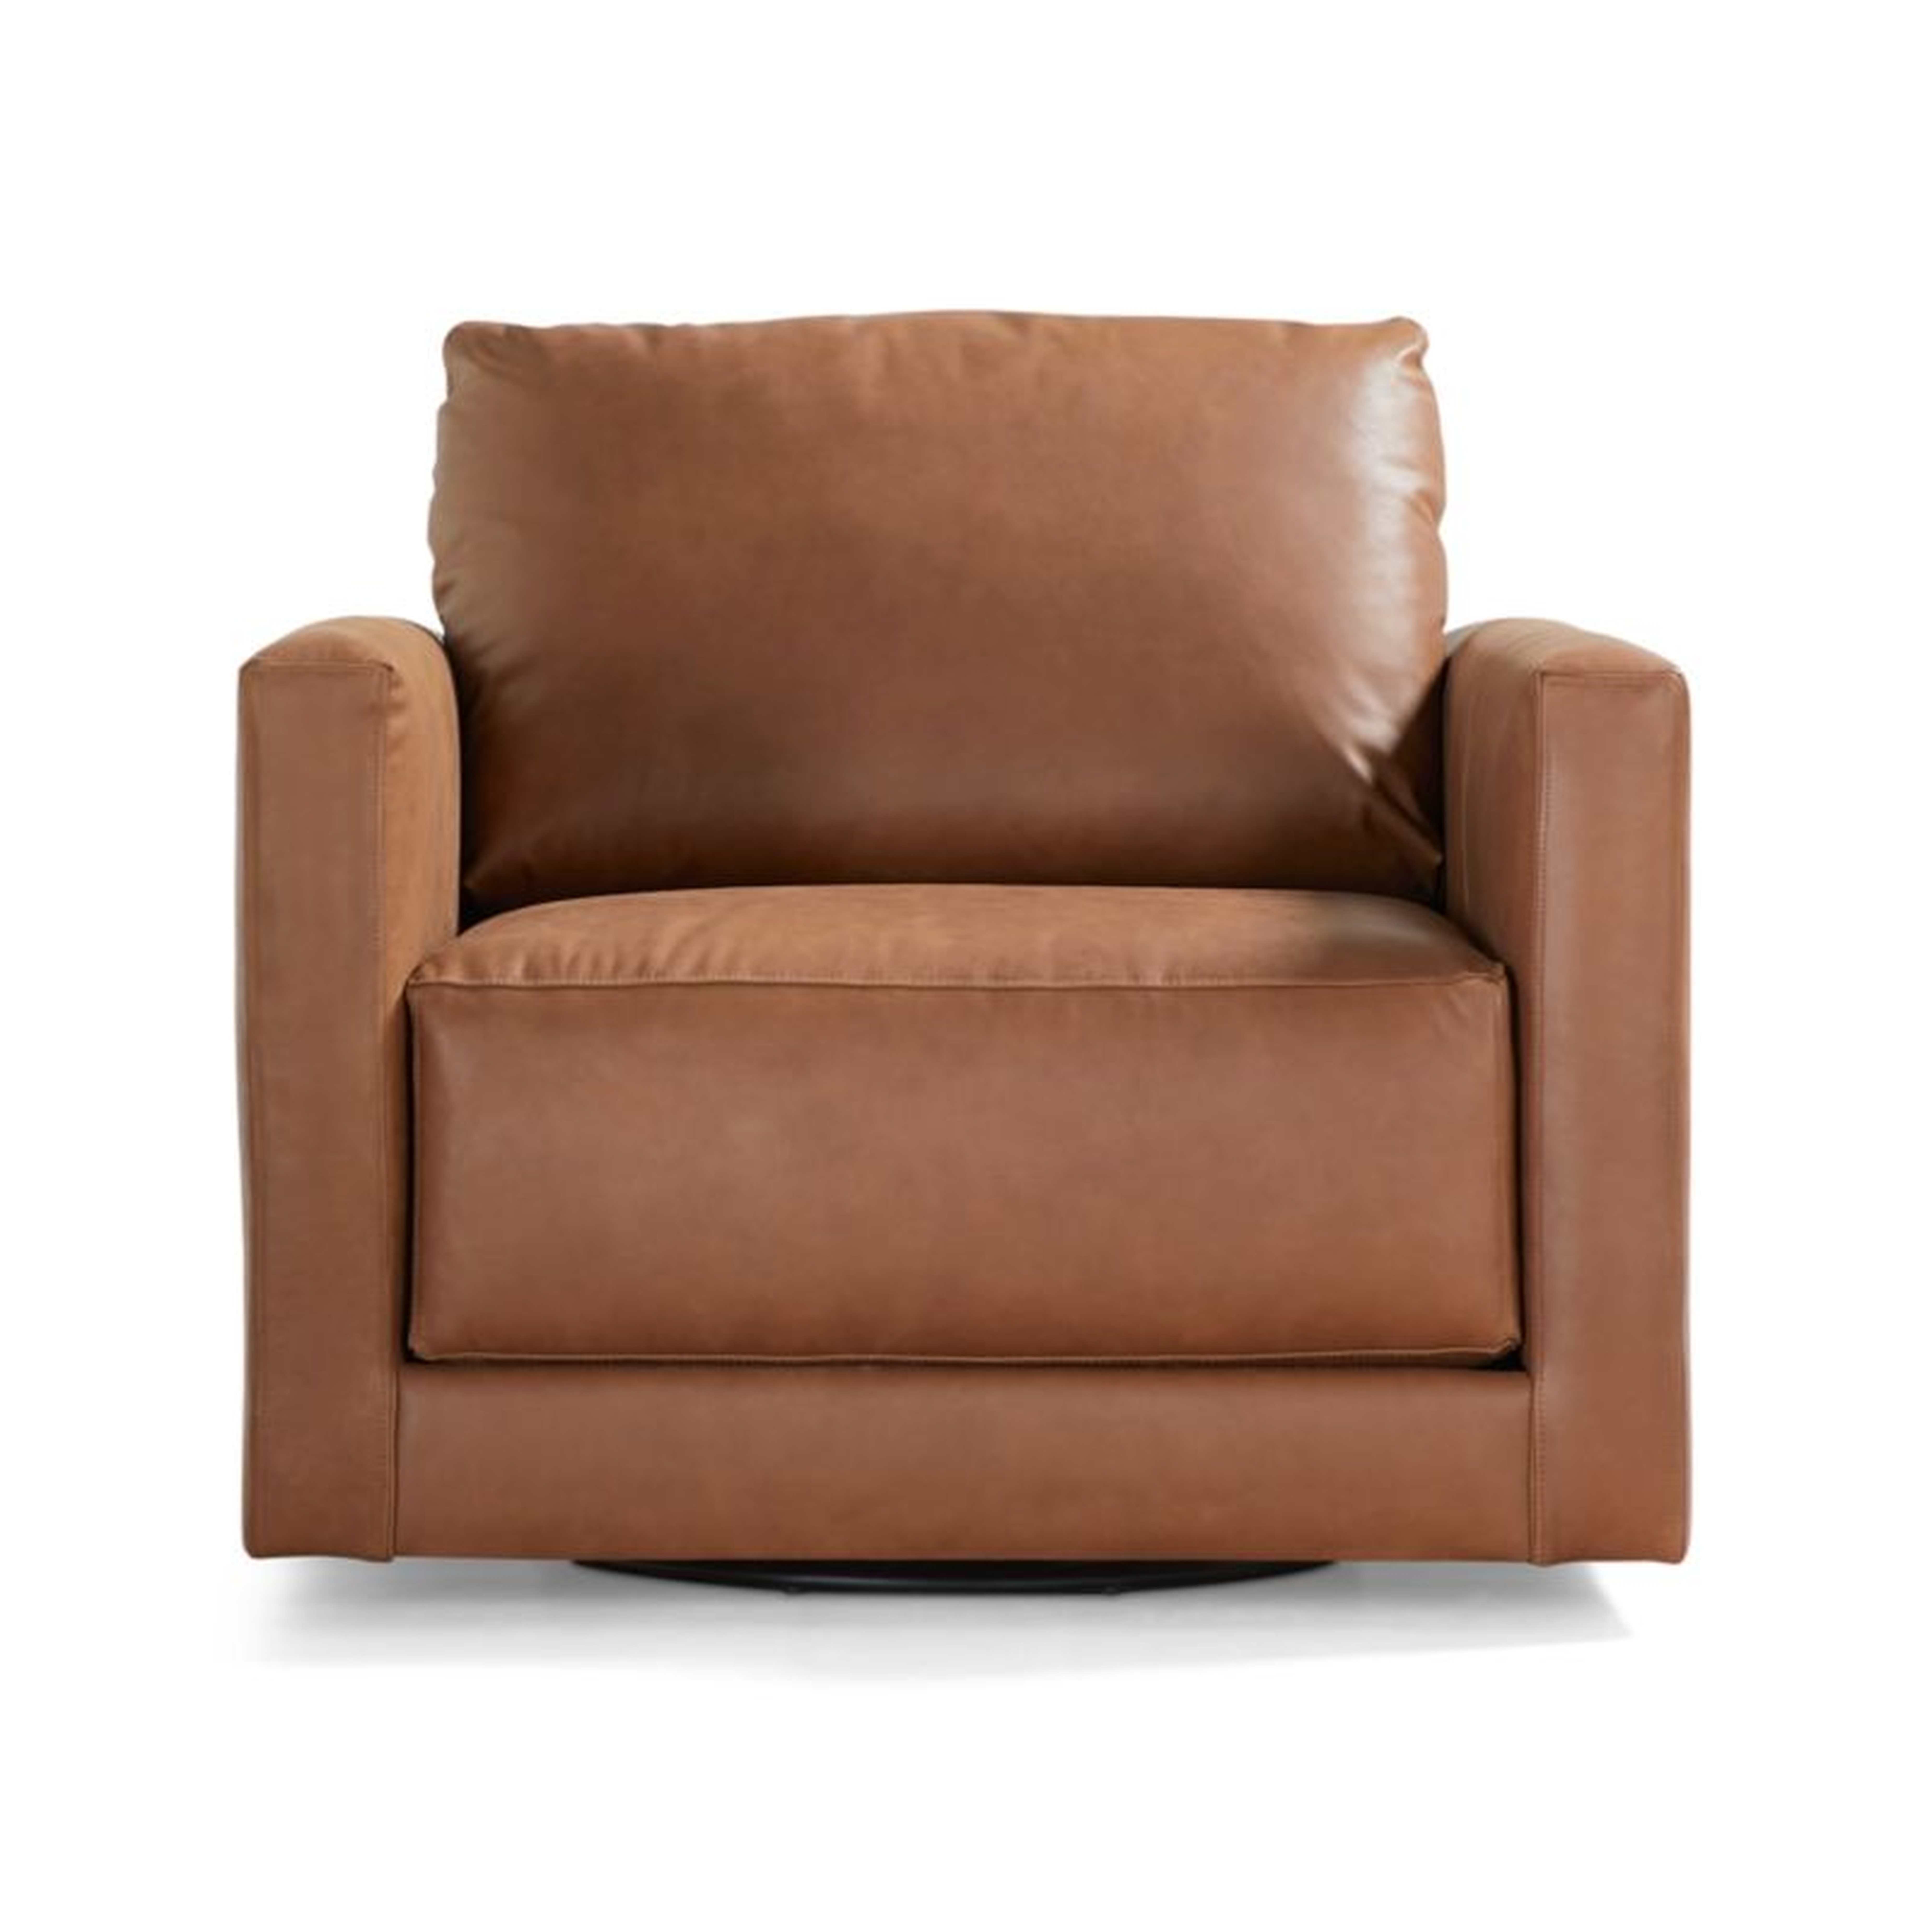 Gather Deep Leather Swivel Chair - Crate and Barrel